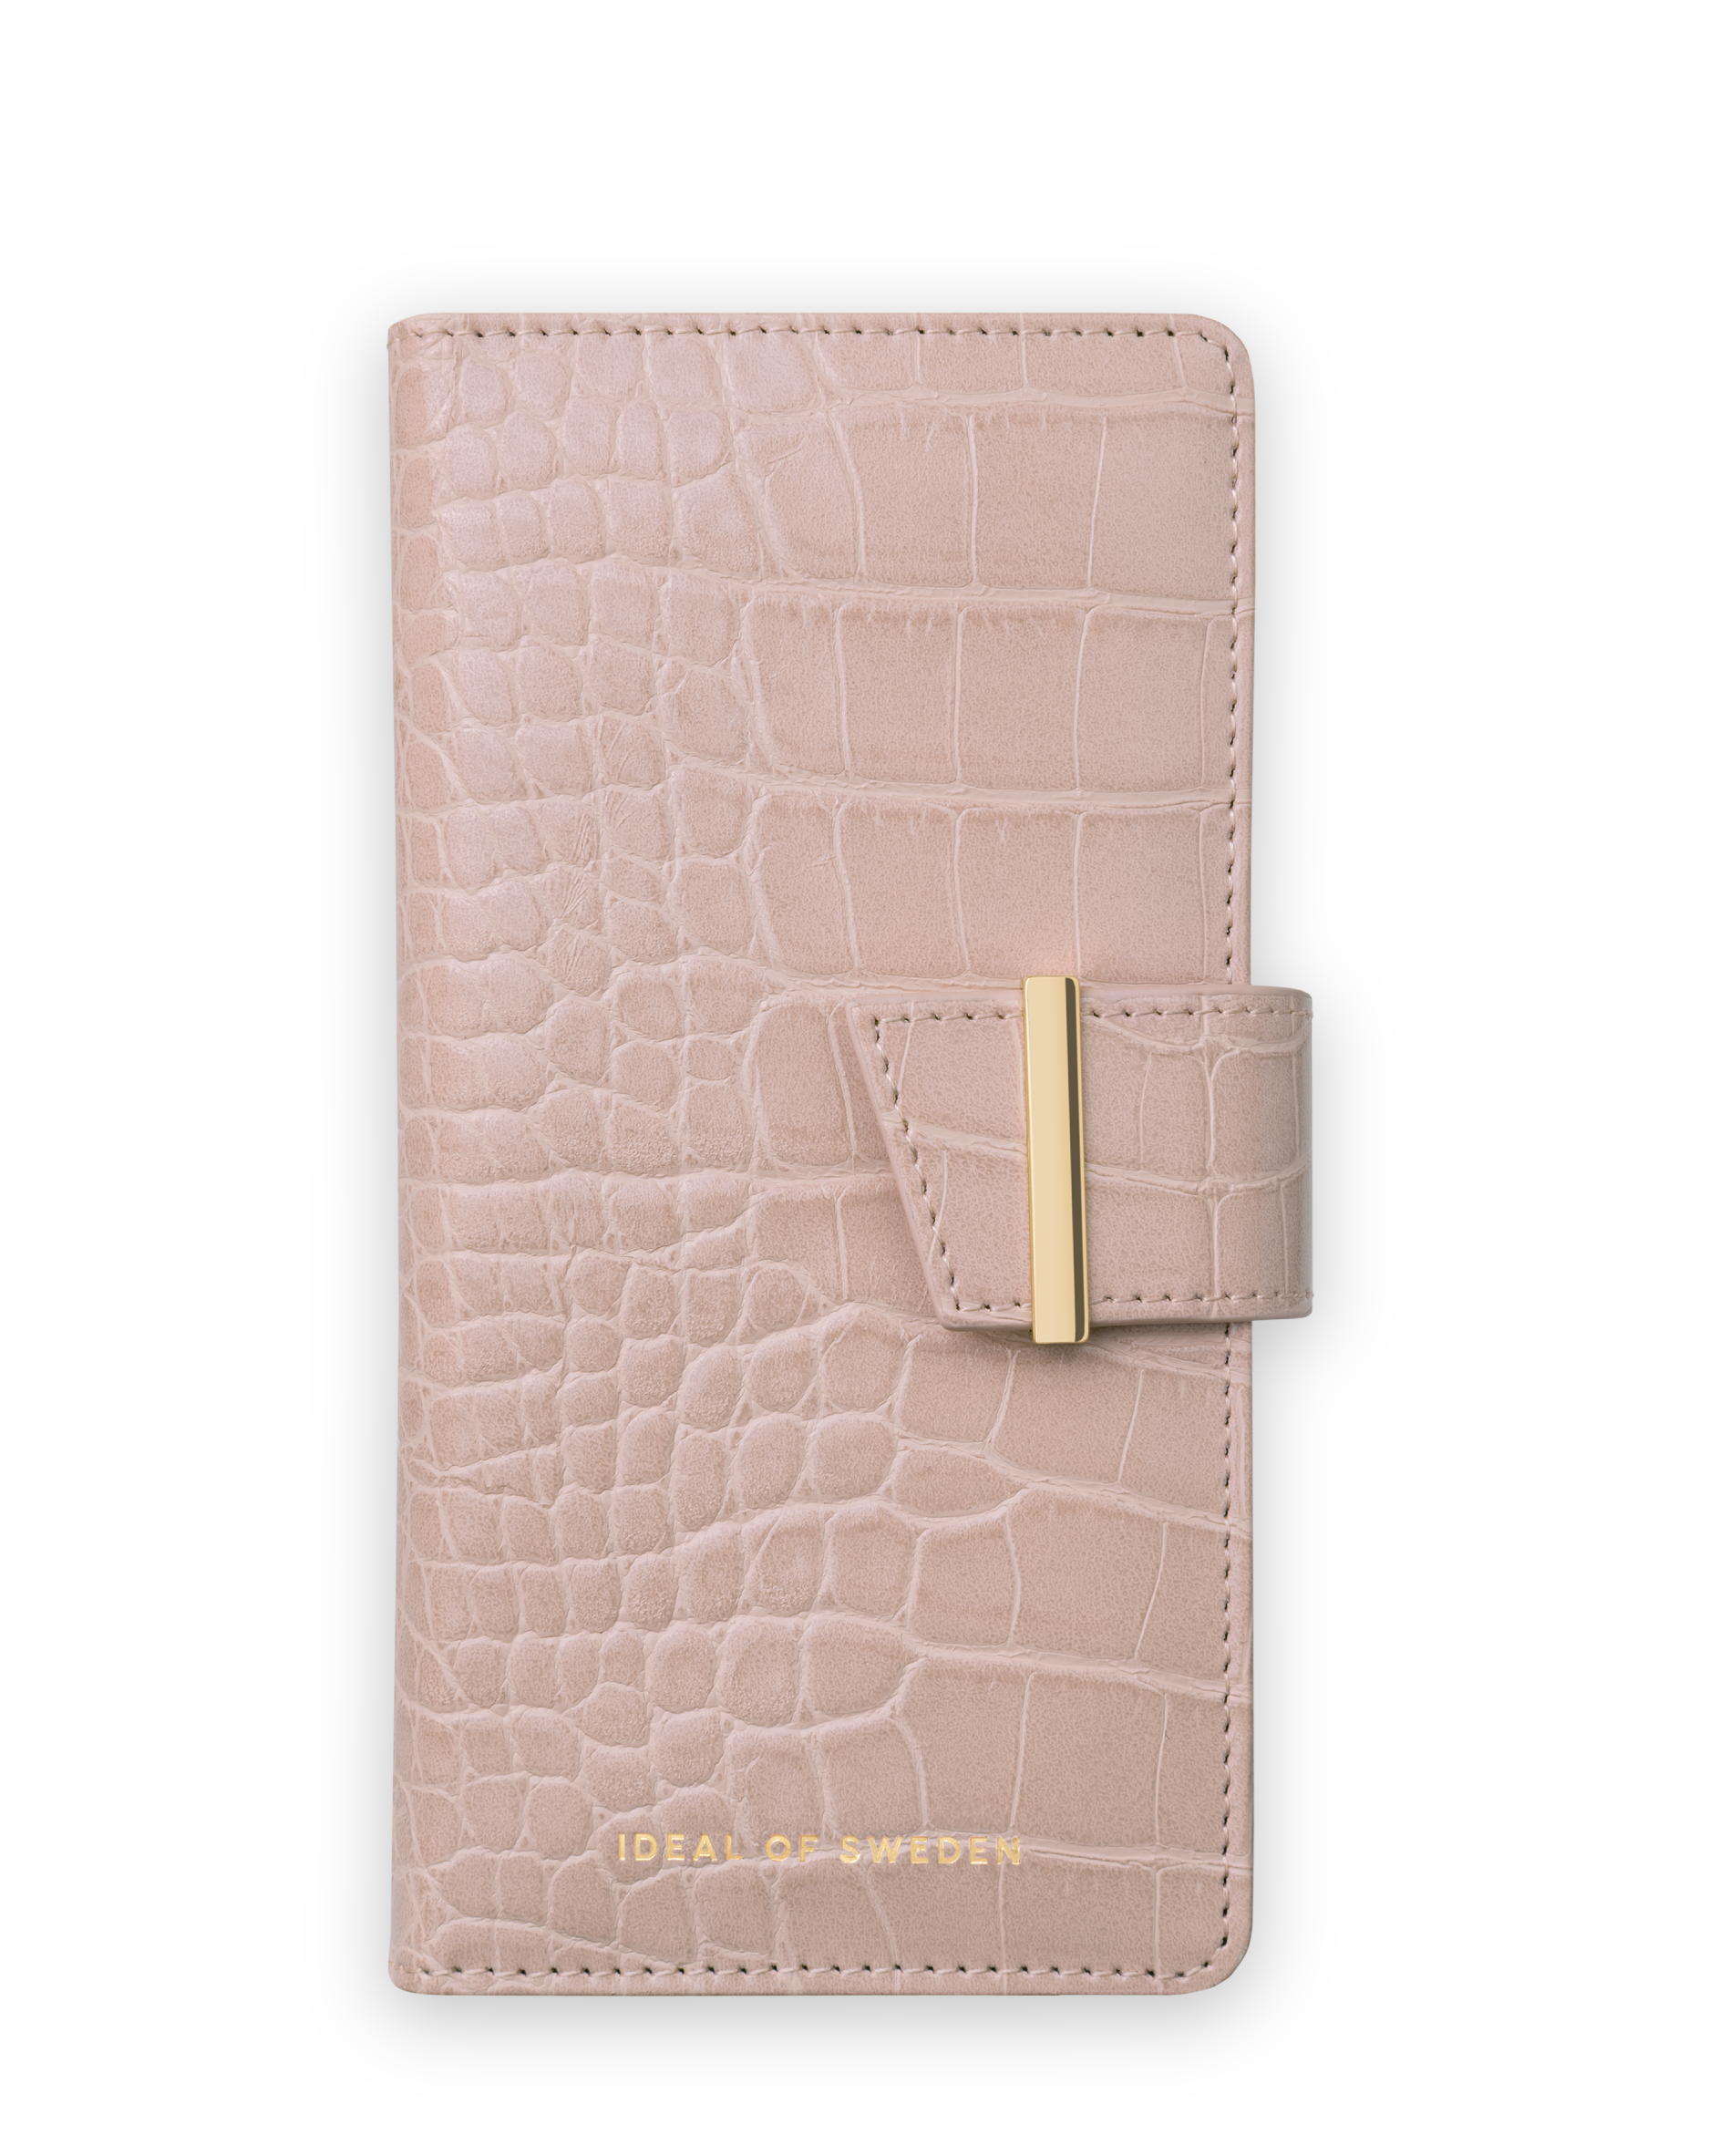 12, Apple Rose Bookcover, 12 OF iPhone IDEAL SWEDEN iPhone Pro, Apple, Apple IDPWSS21-I2061-273, Croco